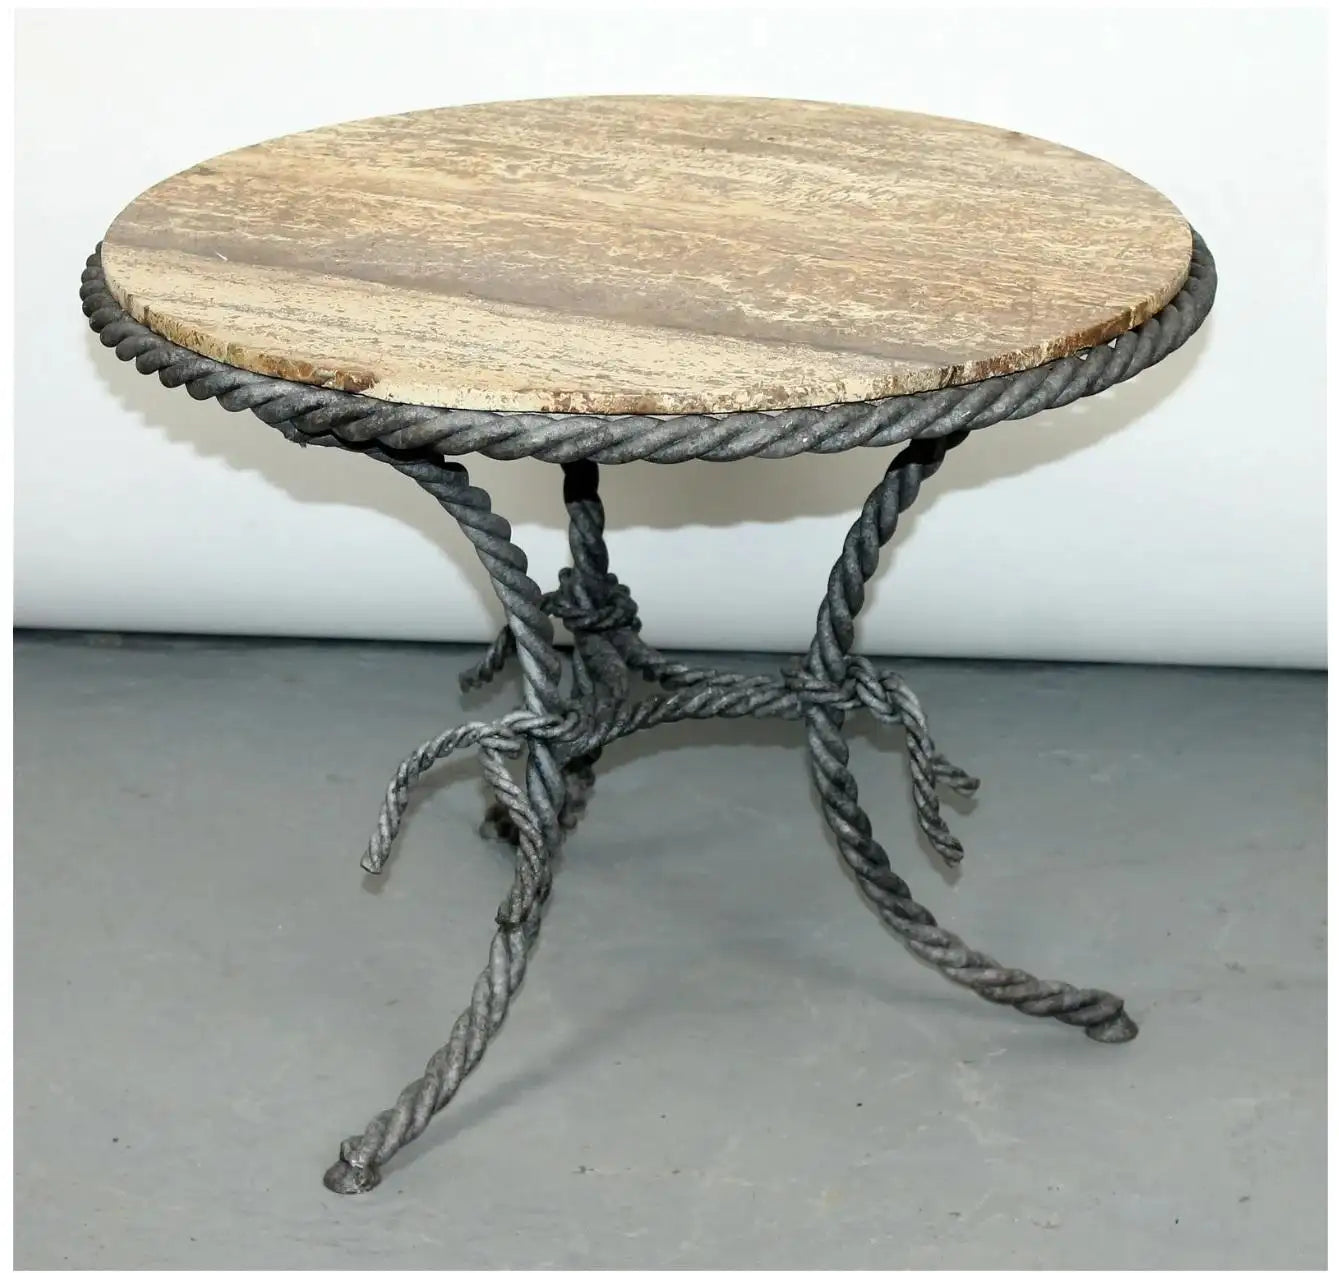 Midcentury Twisted Rope Motif Side Table with Round Travertine Top